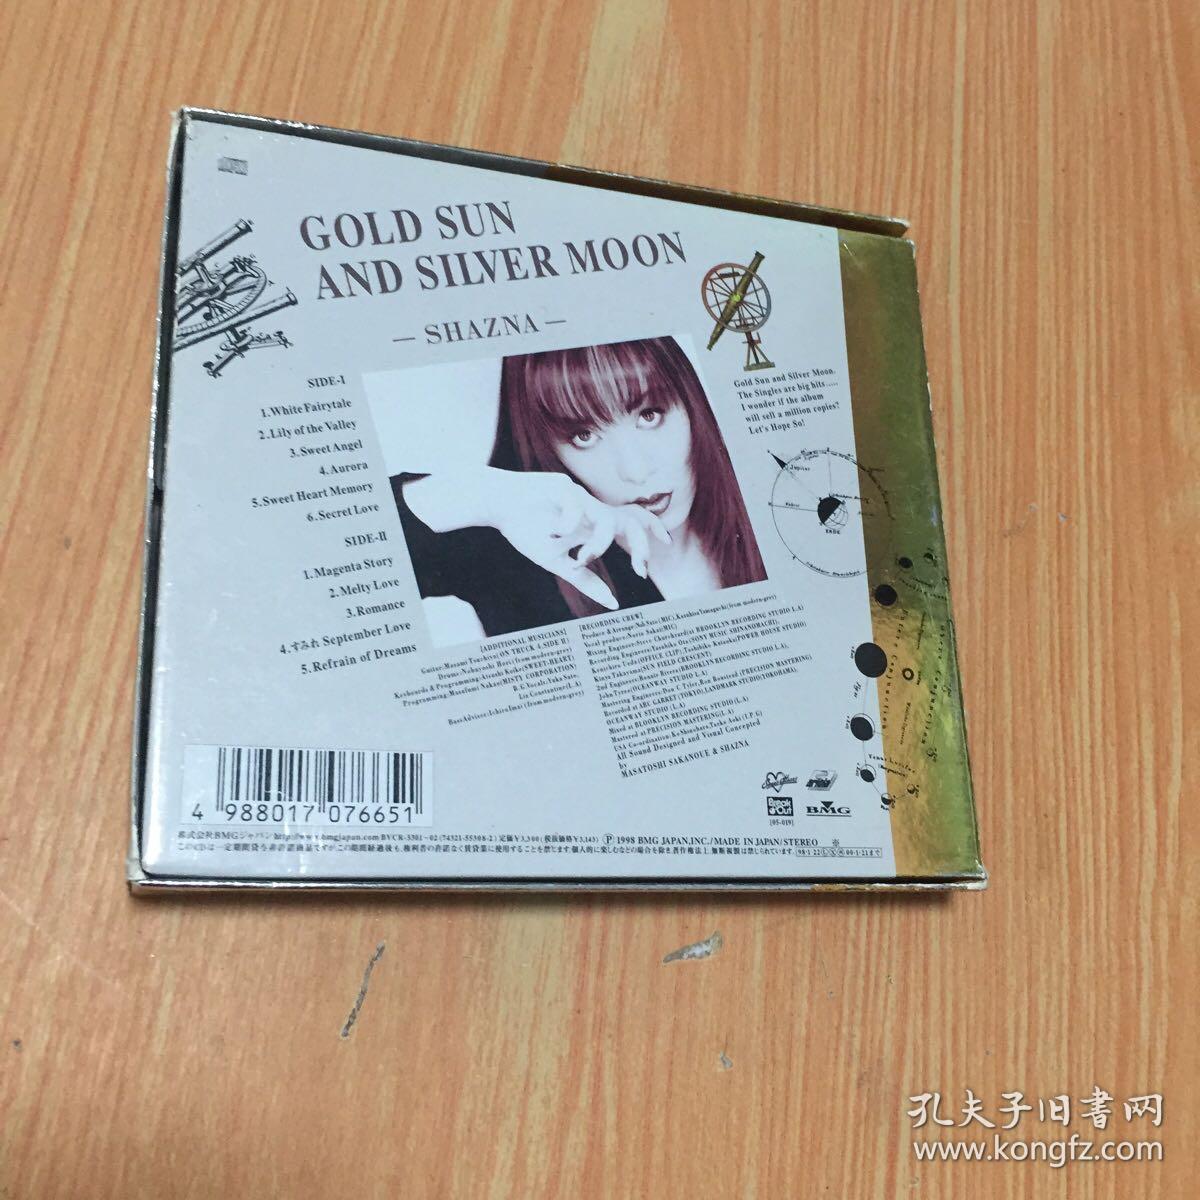 GOLD SUN AND SILVER MOON  CD